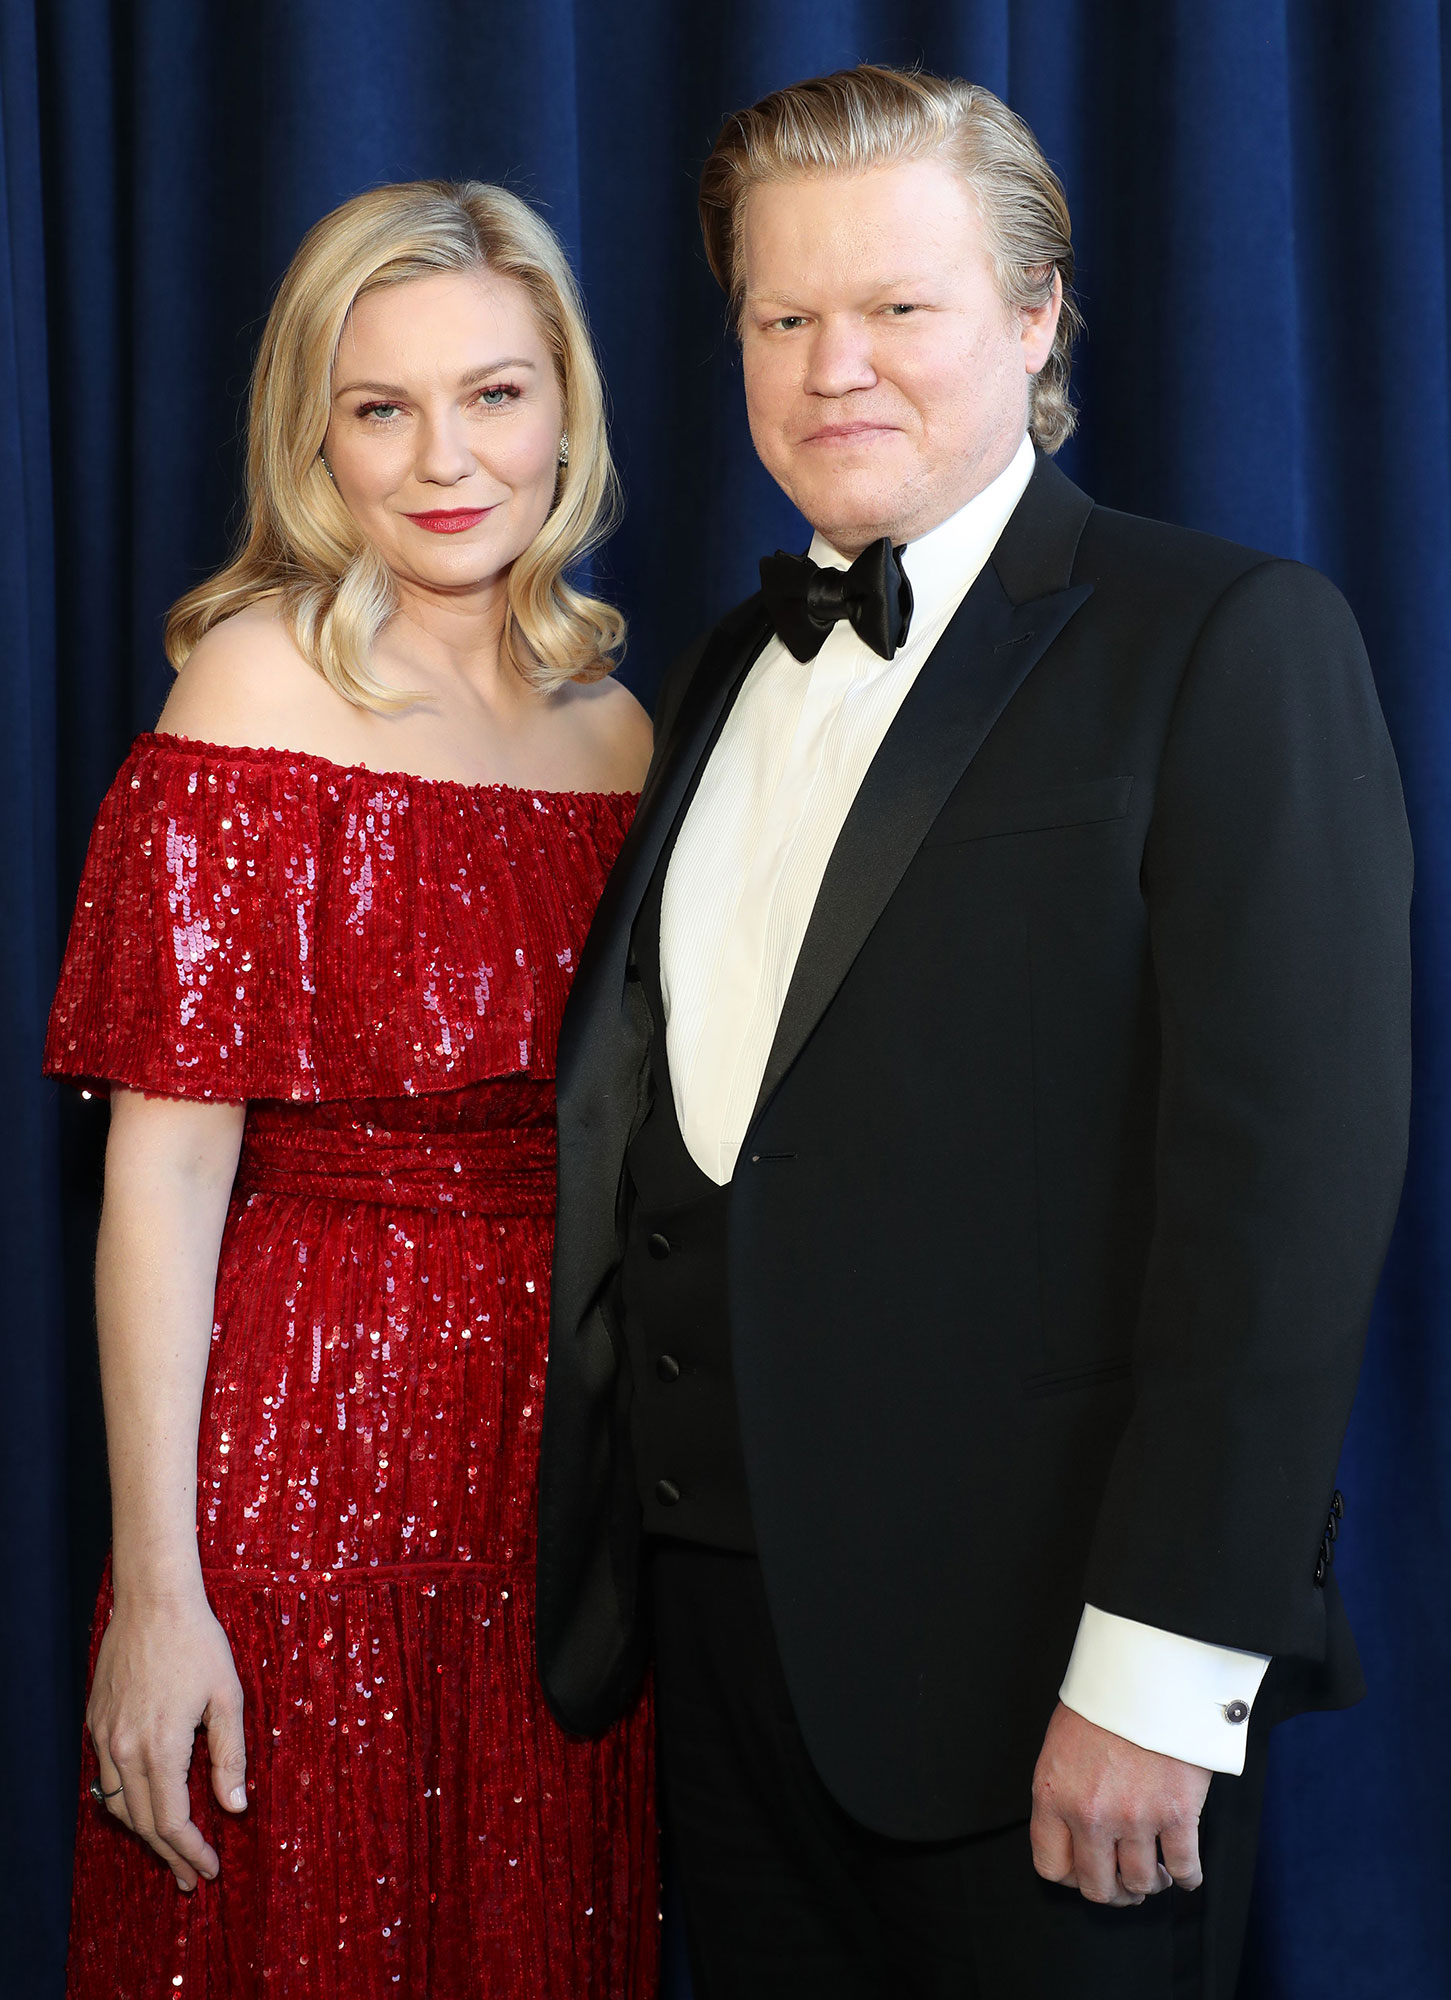 SAG Awards 2022 Kirsten Dunst and Jesse Plemons Are the Cutest Couple on the Red Carpet